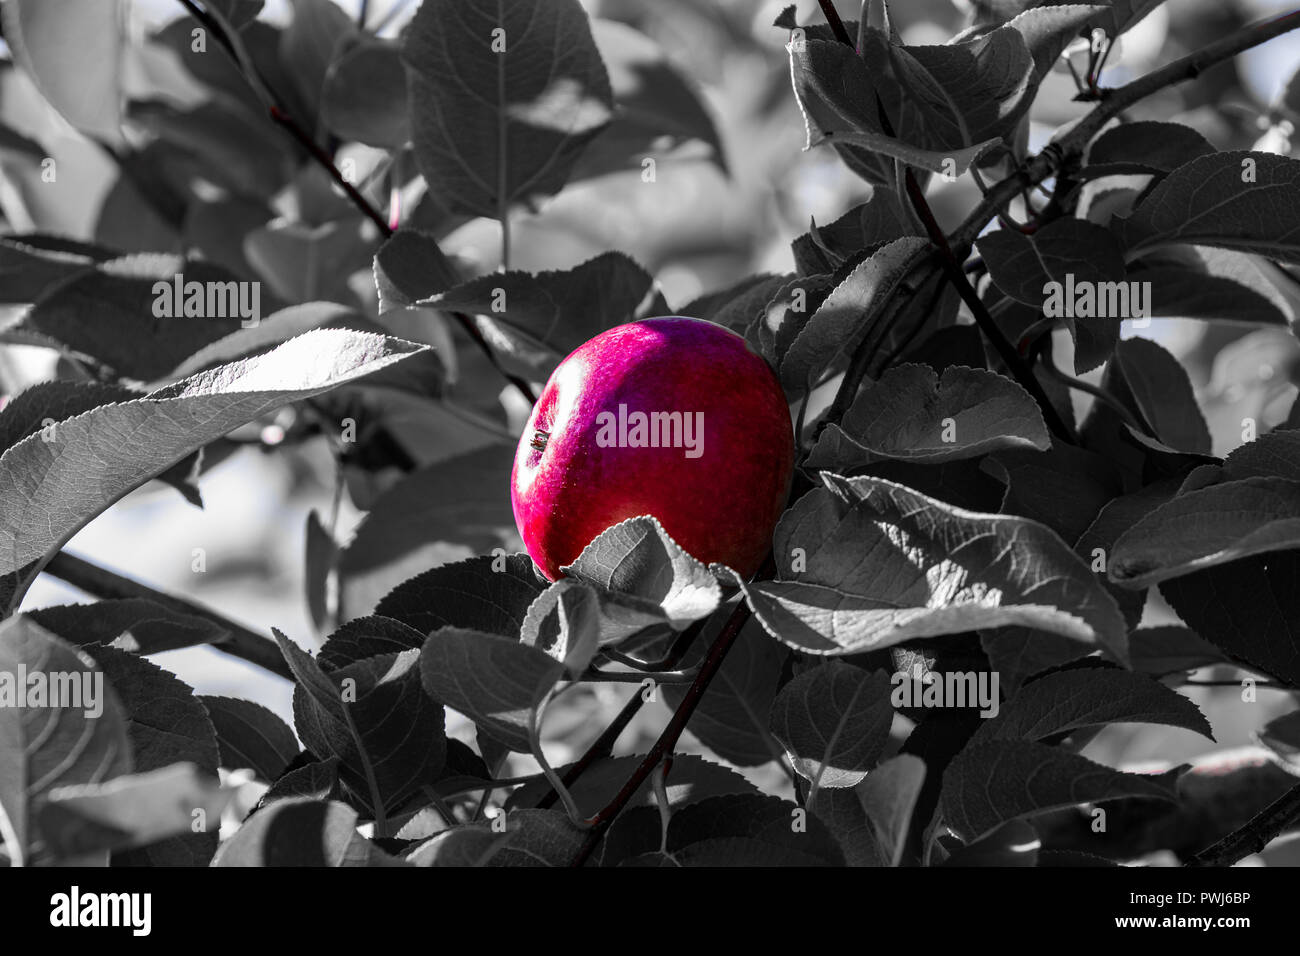 Apple of my eye. Red delicious apple hanging on a tree Stock Photo